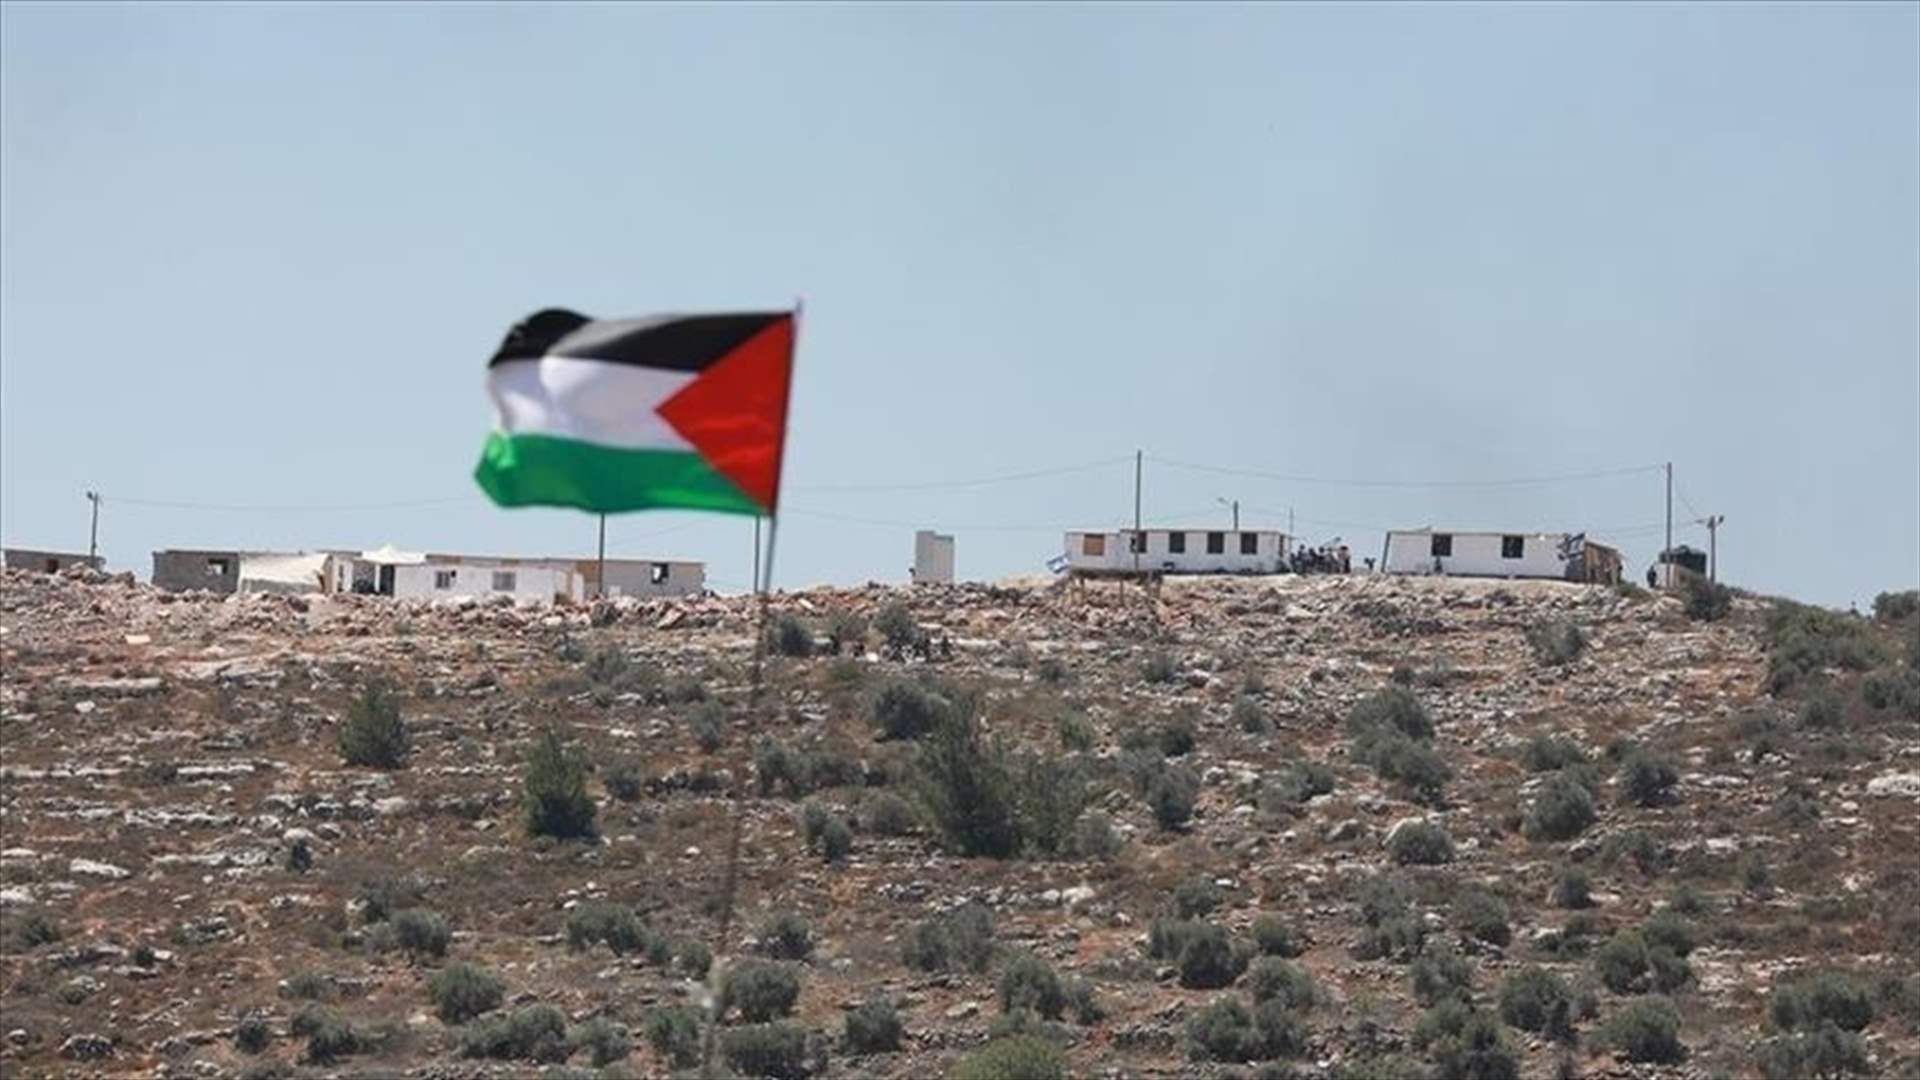 United Nations: The situation in West Bank is &#39;alarming&#39; and requires &#39;urgent&#39; action